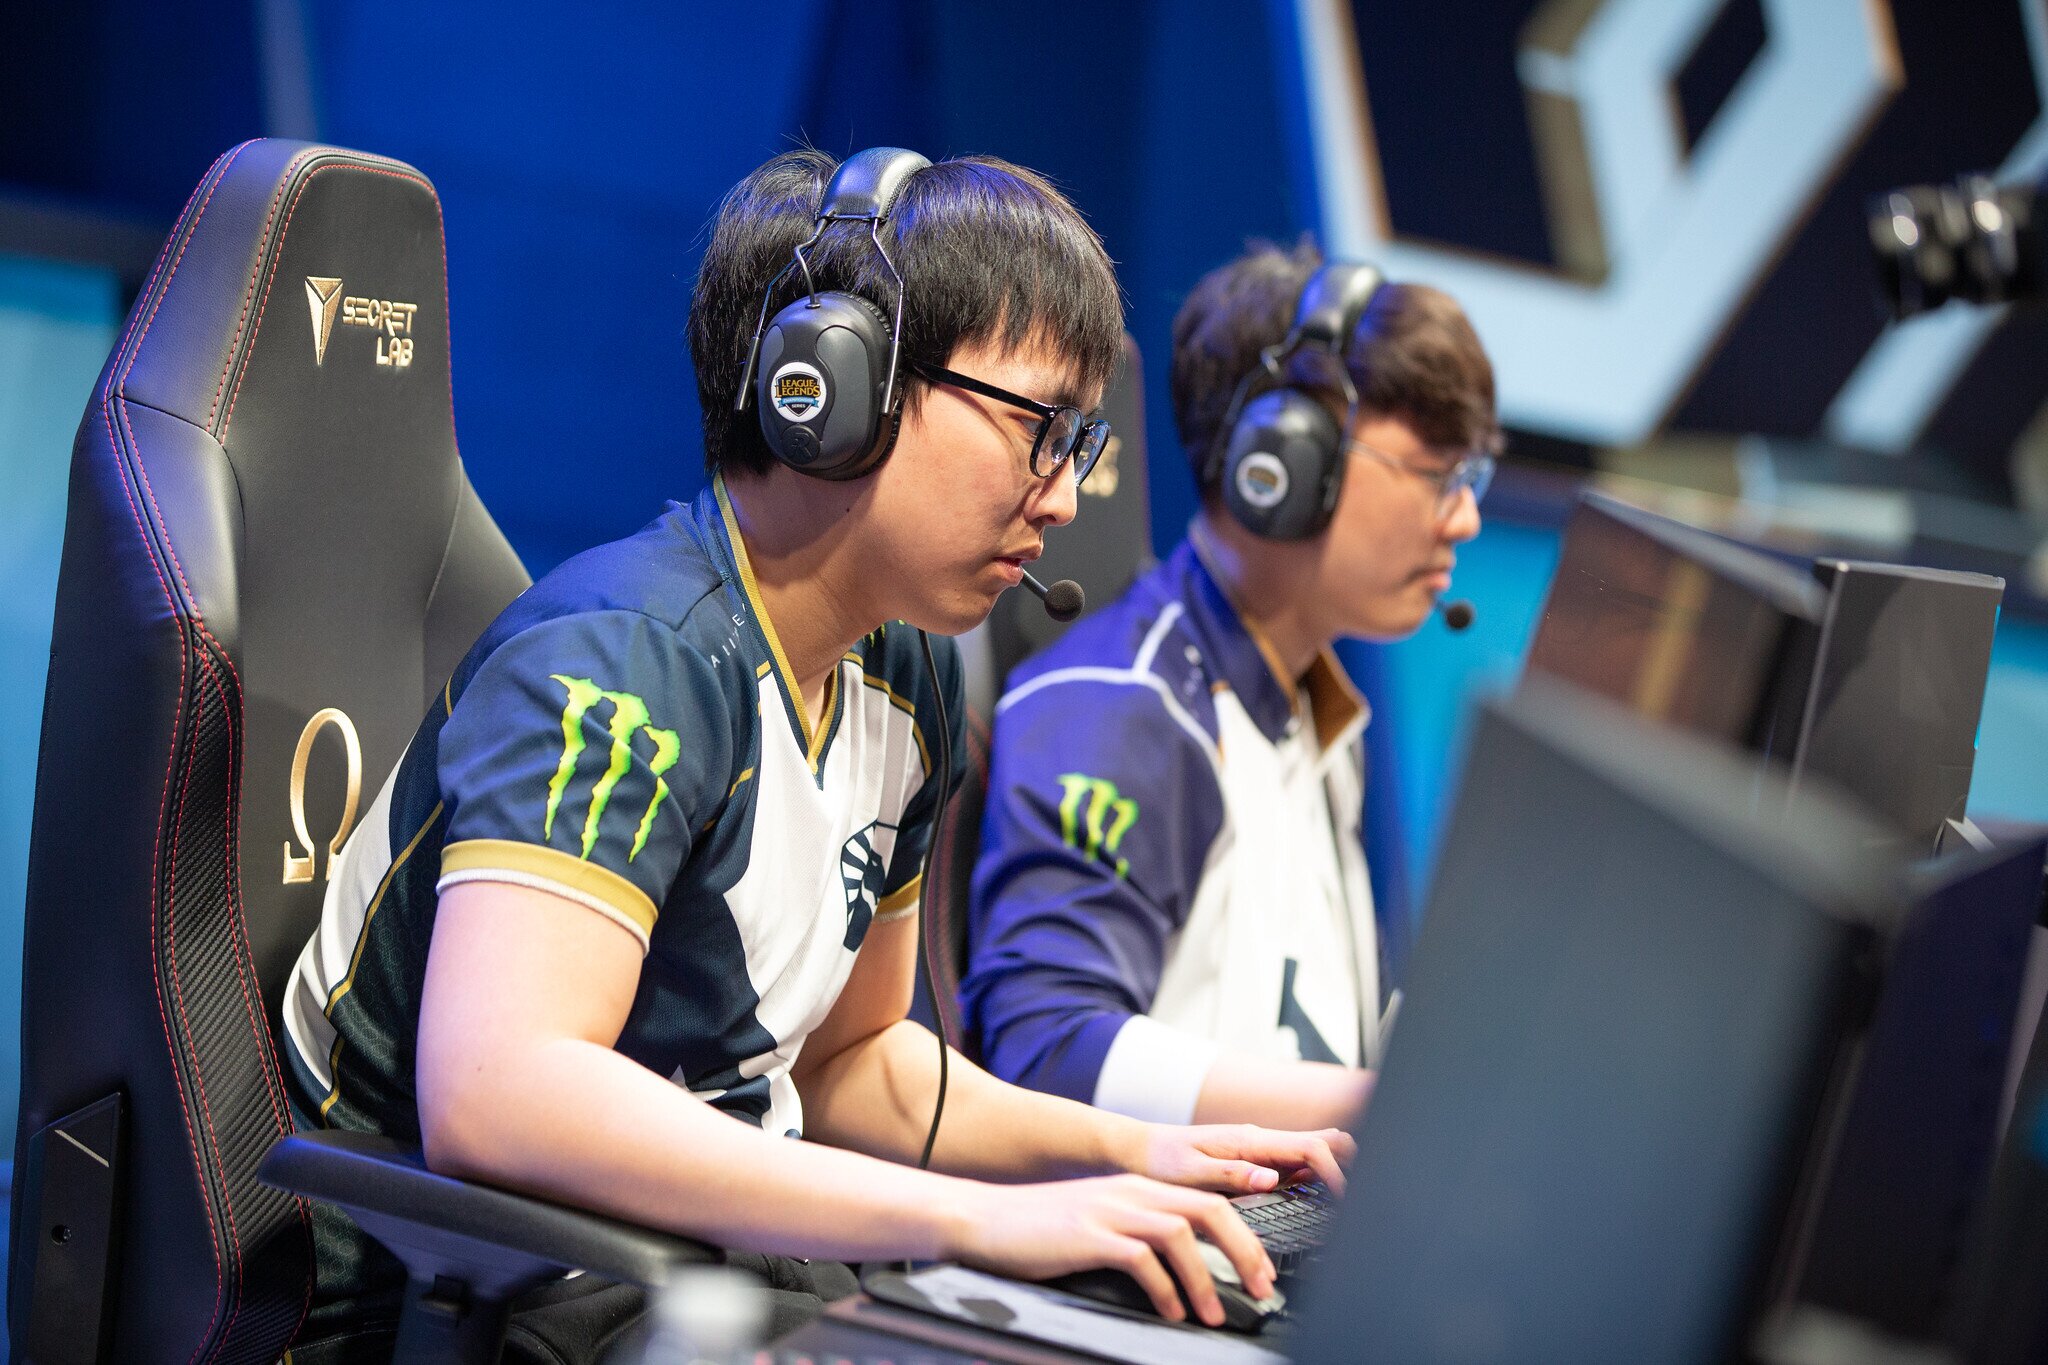 With Tactical and Rikara filling the marksman position, Doublelift will remain on the bench for Liquid (Photo via Riot Games/Flickr)